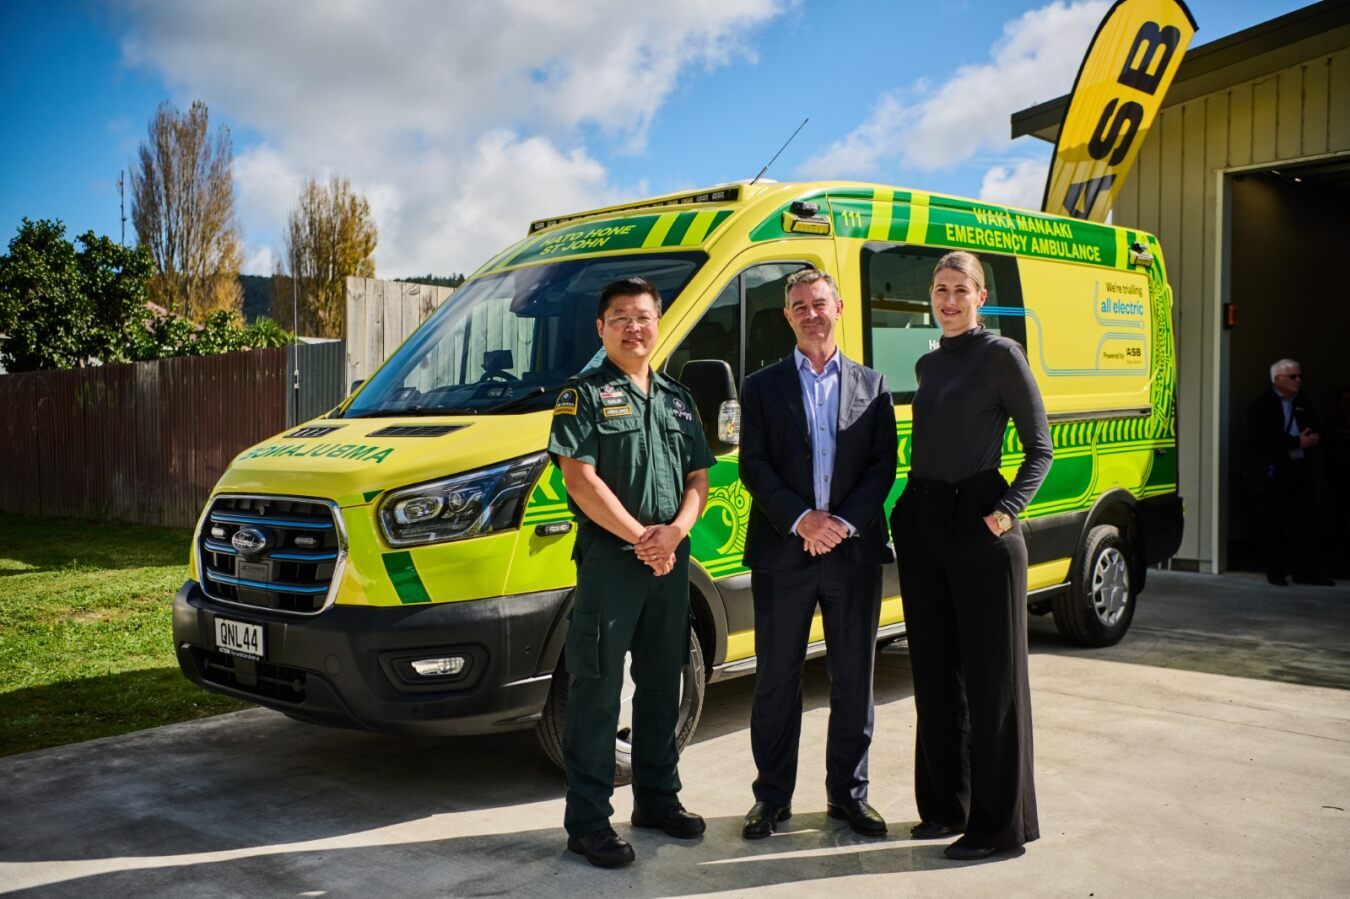 The first electric ambulance in Australasia based on a Ford Transit EV.